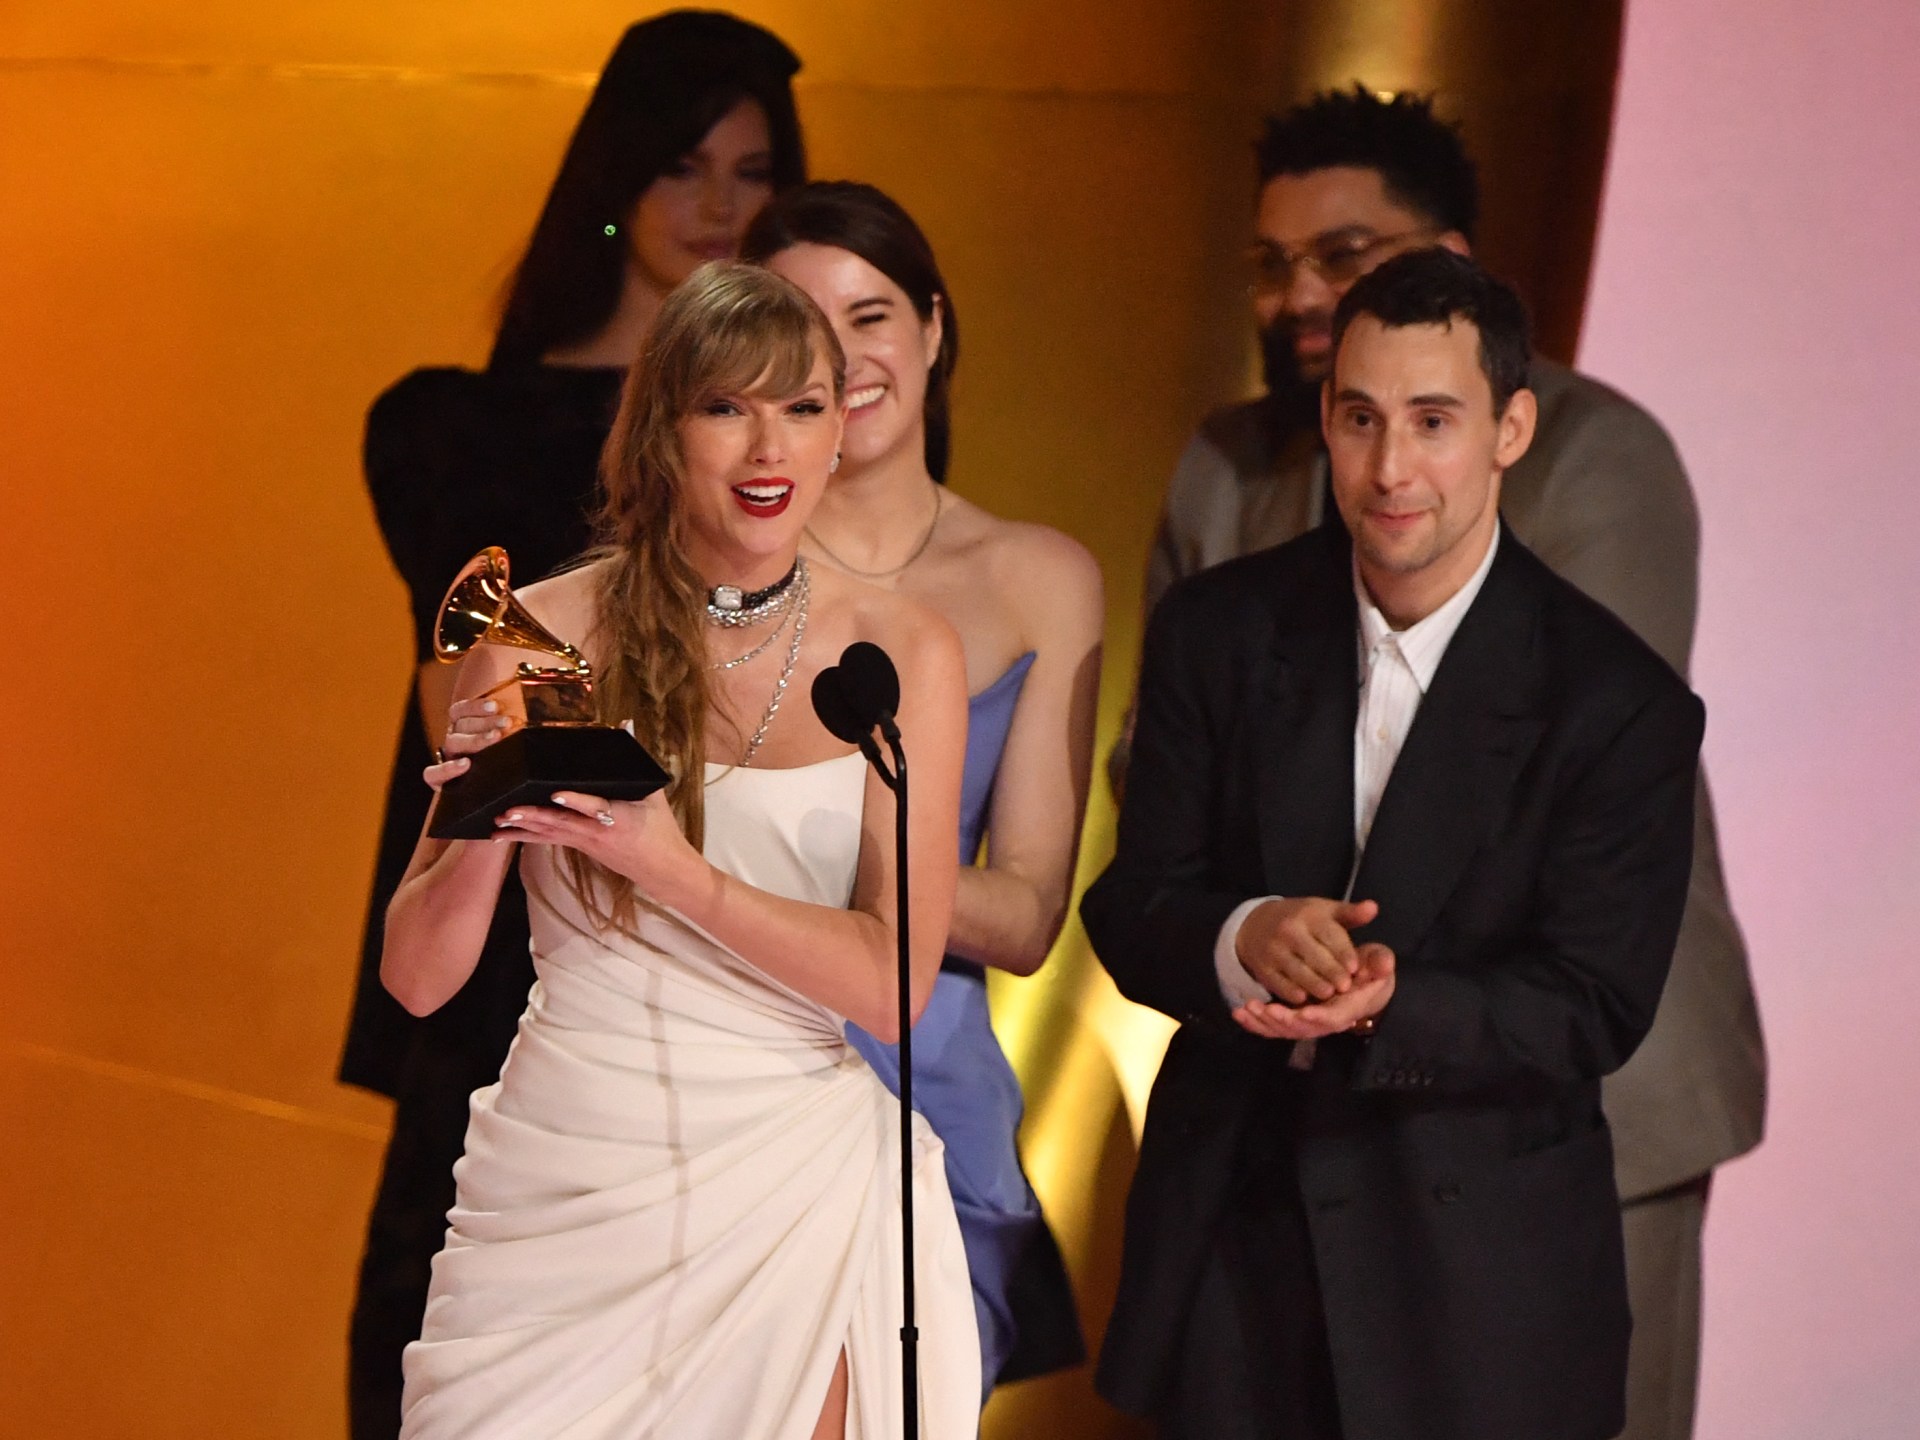 Women sweep the Grammys; Taylor Swift wins best album for record 4th time | Music News